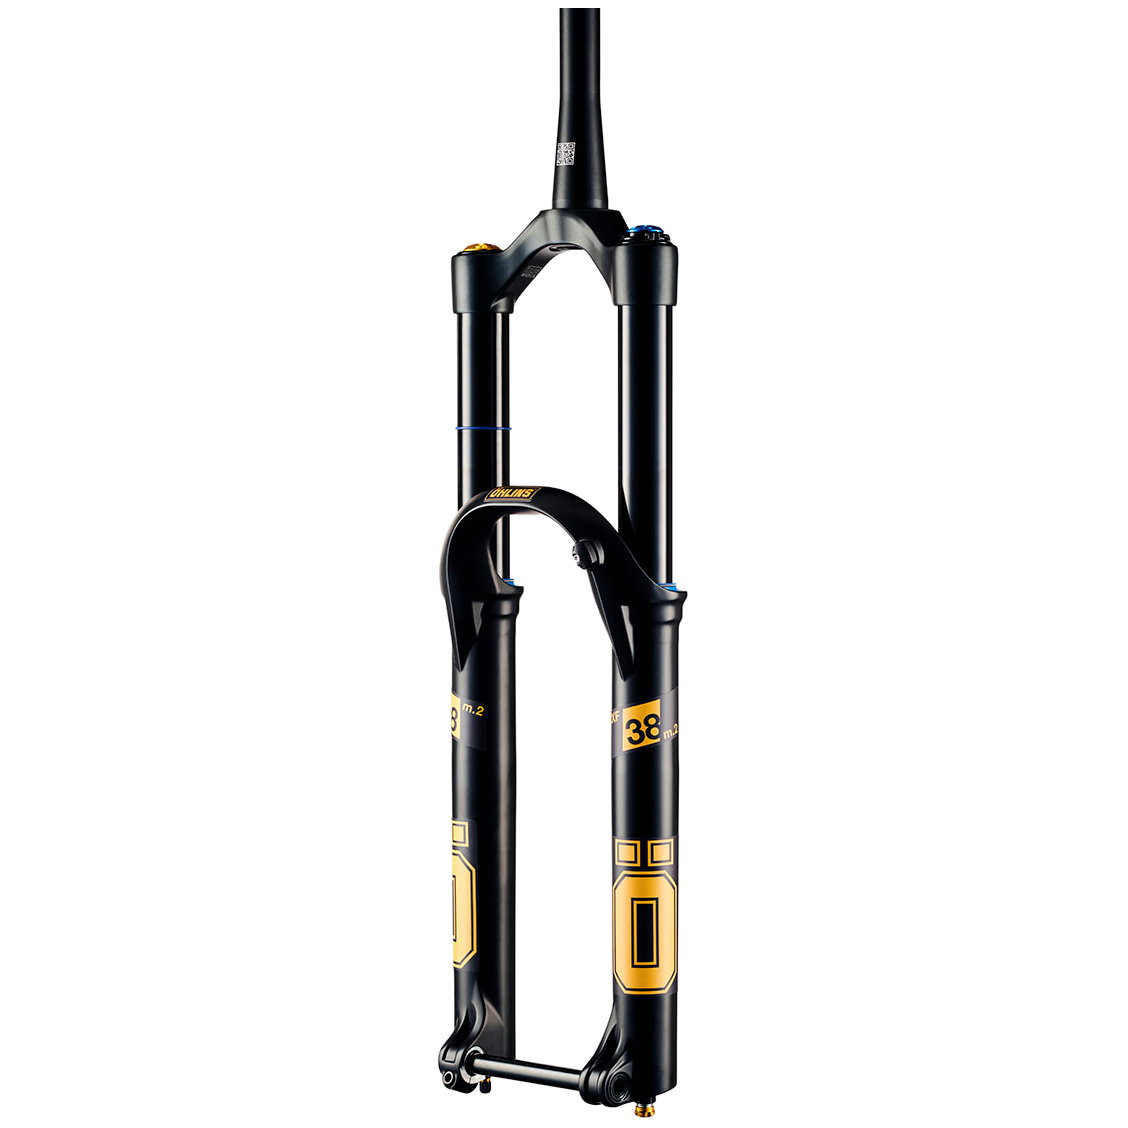 Image of ÖHLINS RXF38 m.2 Air 29" Fork - 180mm - Tapered - 15x110mm Boost - Offset 44mm